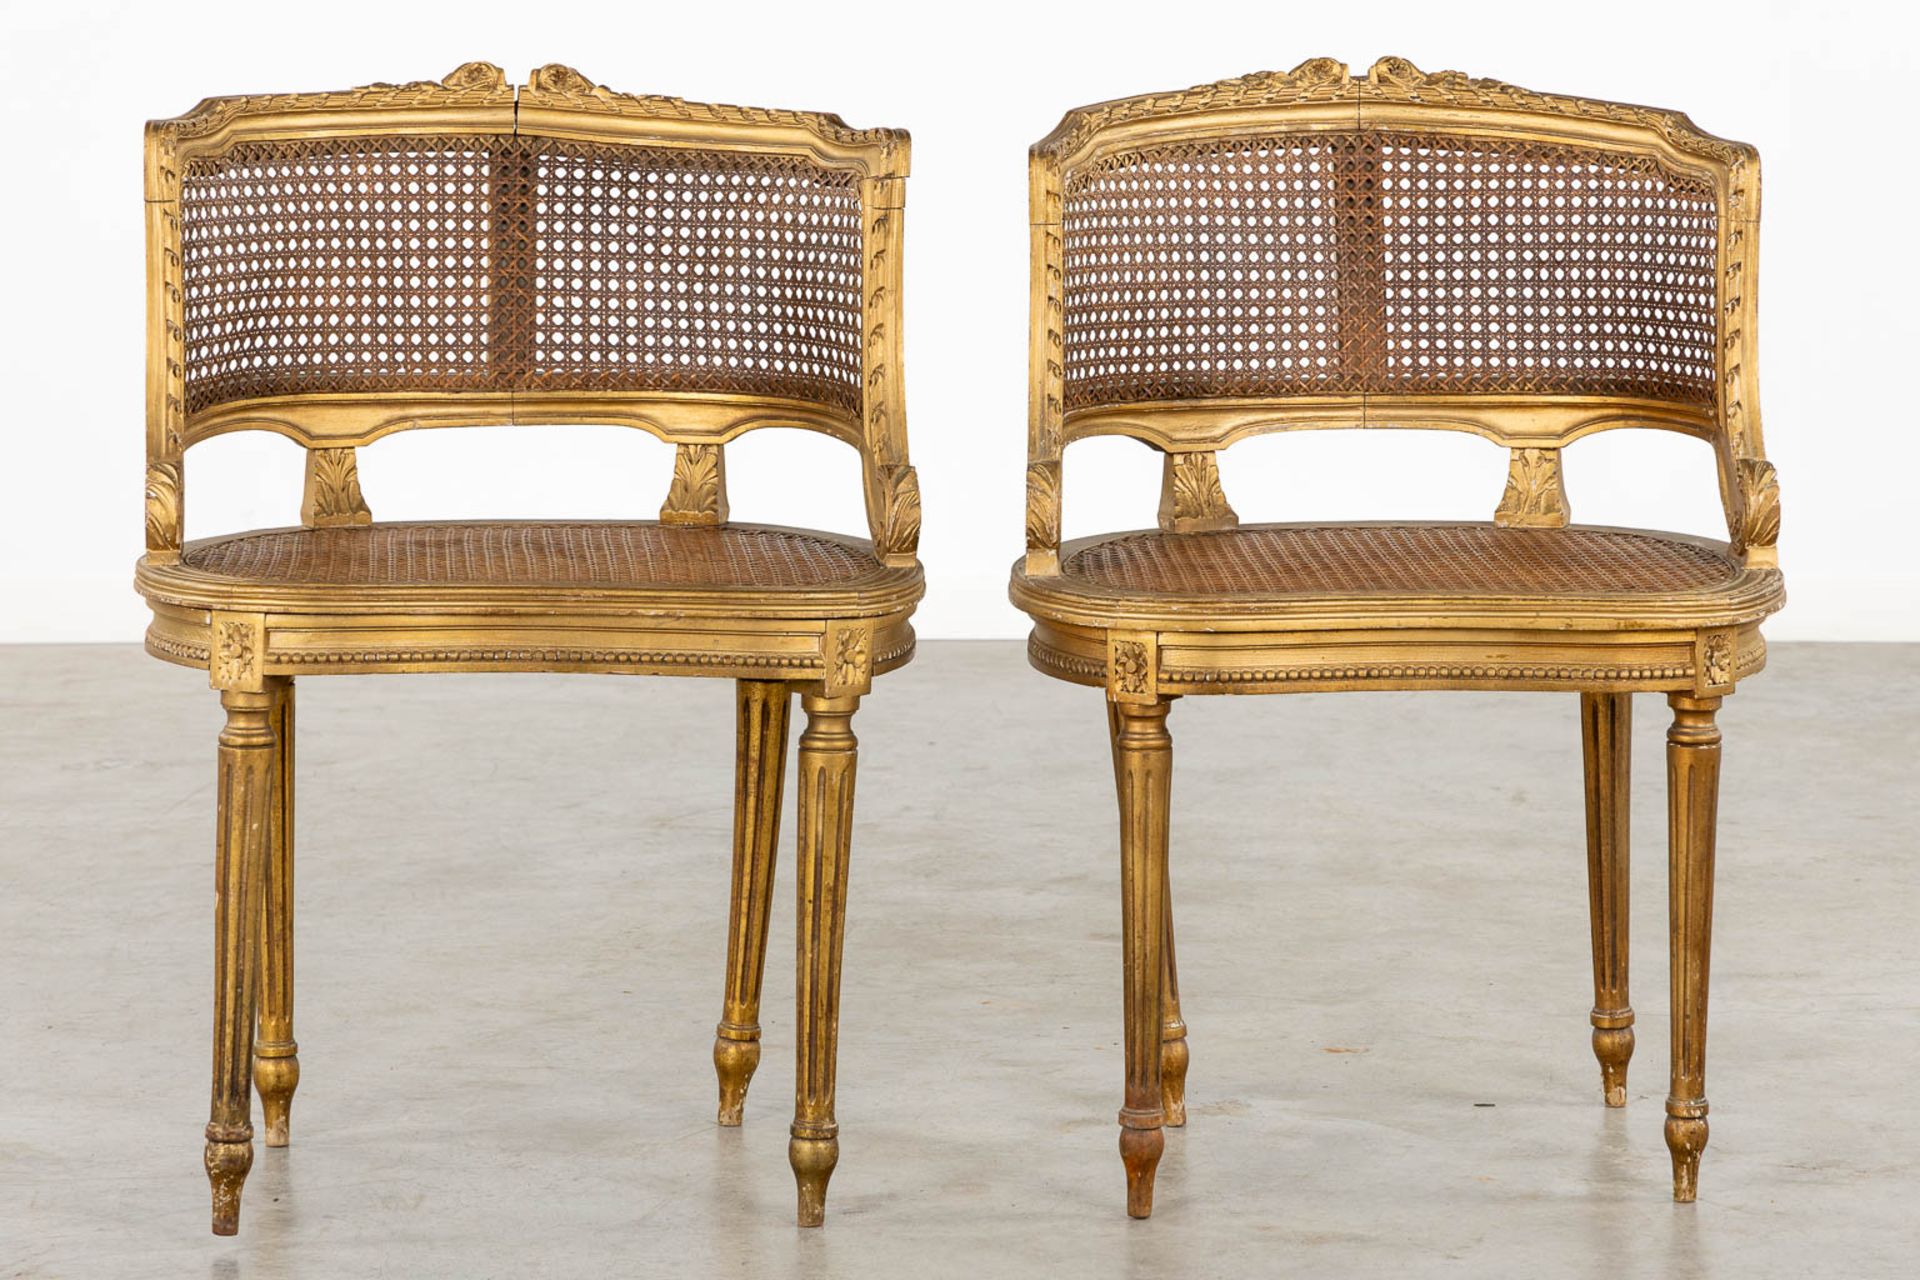 Two side tables, Two chairs, sculptured wood in Louis XVI style. Circa 1900. (L:57 x W:81 x H:75 cm) - Bild 11 aus 18